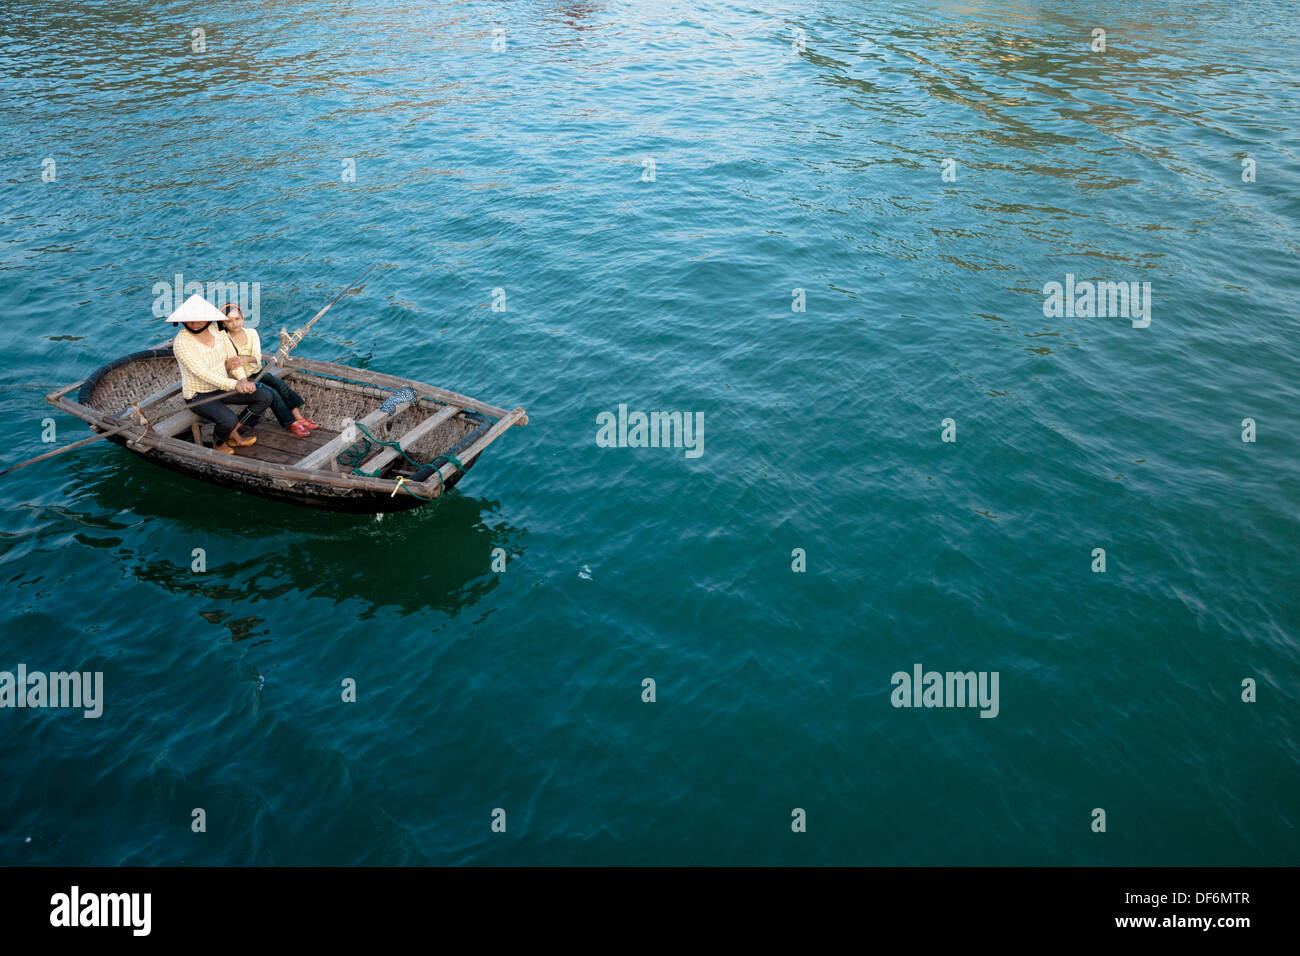 A Vietnamese woman and a Vietnamese girl in a rowboat on Lan Ha Bay near Cat Ba Town in Halong Bay, Vietnam. Stock Photo